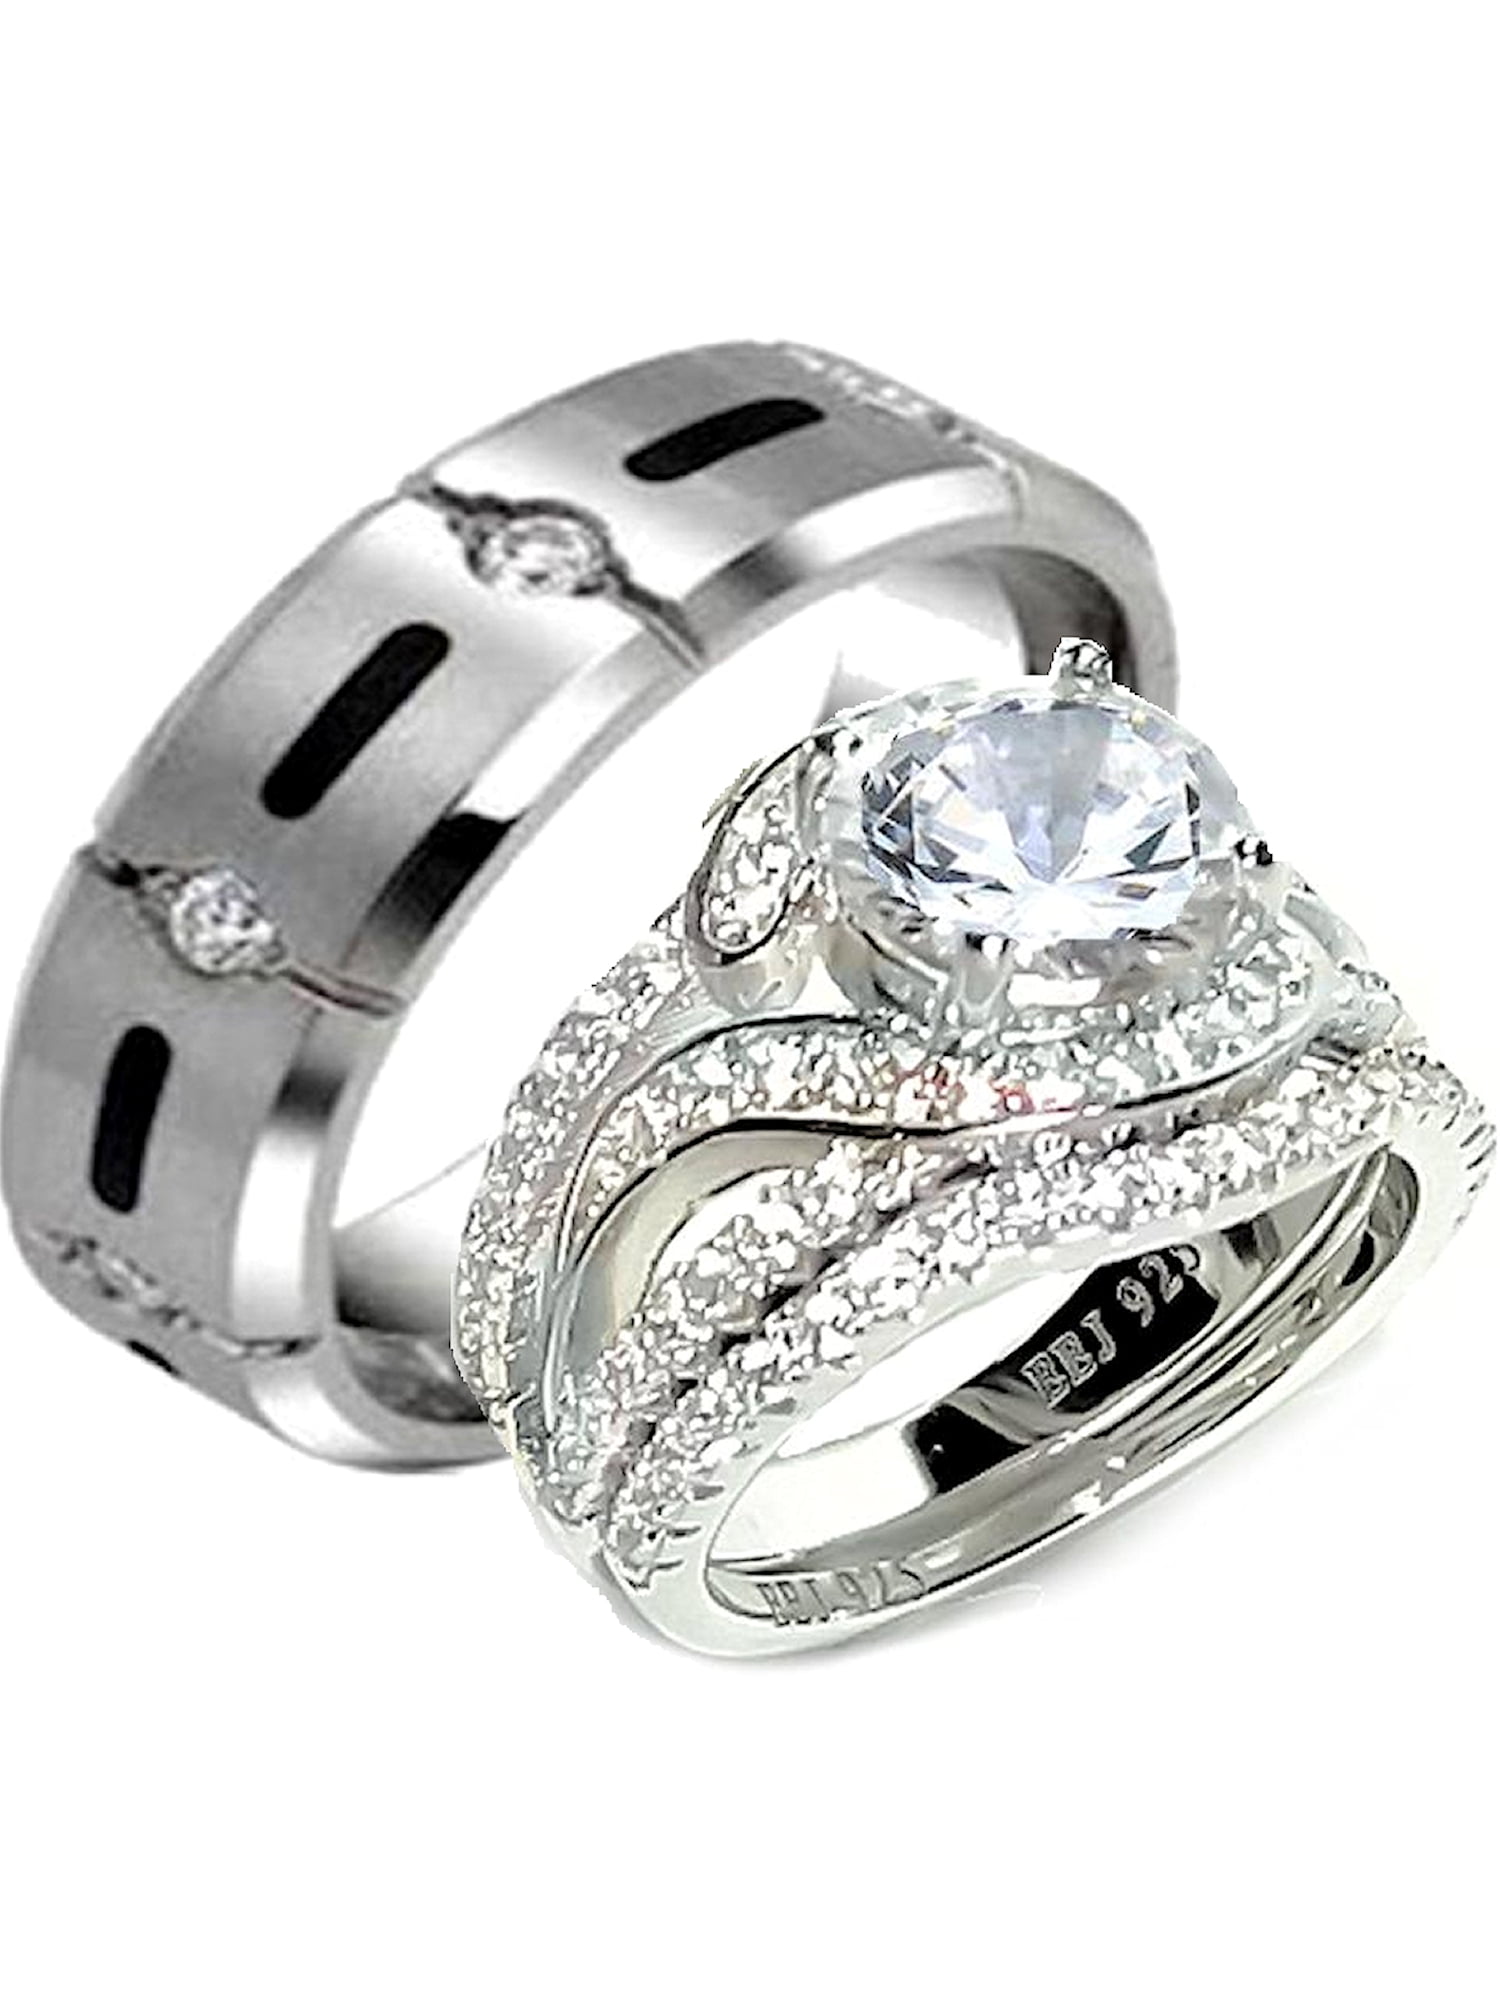 New His And Hers Titanium /925 Sterling Silver Wedding Engagement Ring Band Set 